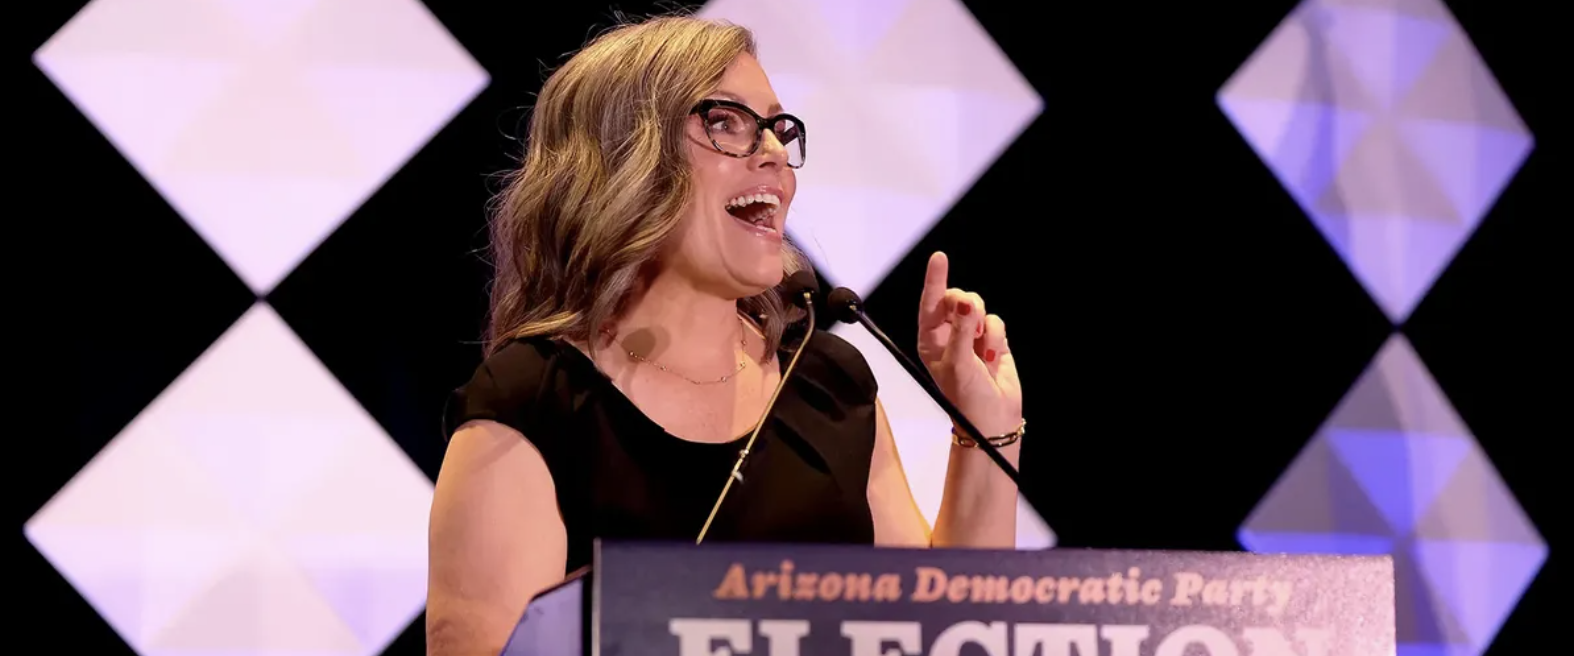 Arizona Democratic gubernatorial nominee Katie Hobbs speaks to supporters at an election night watch party at the Renaissance Phoenix Downtown Hotel on November 08, 2022 in Phoenix, Arizona. (Christian Petersen/Getty Images)